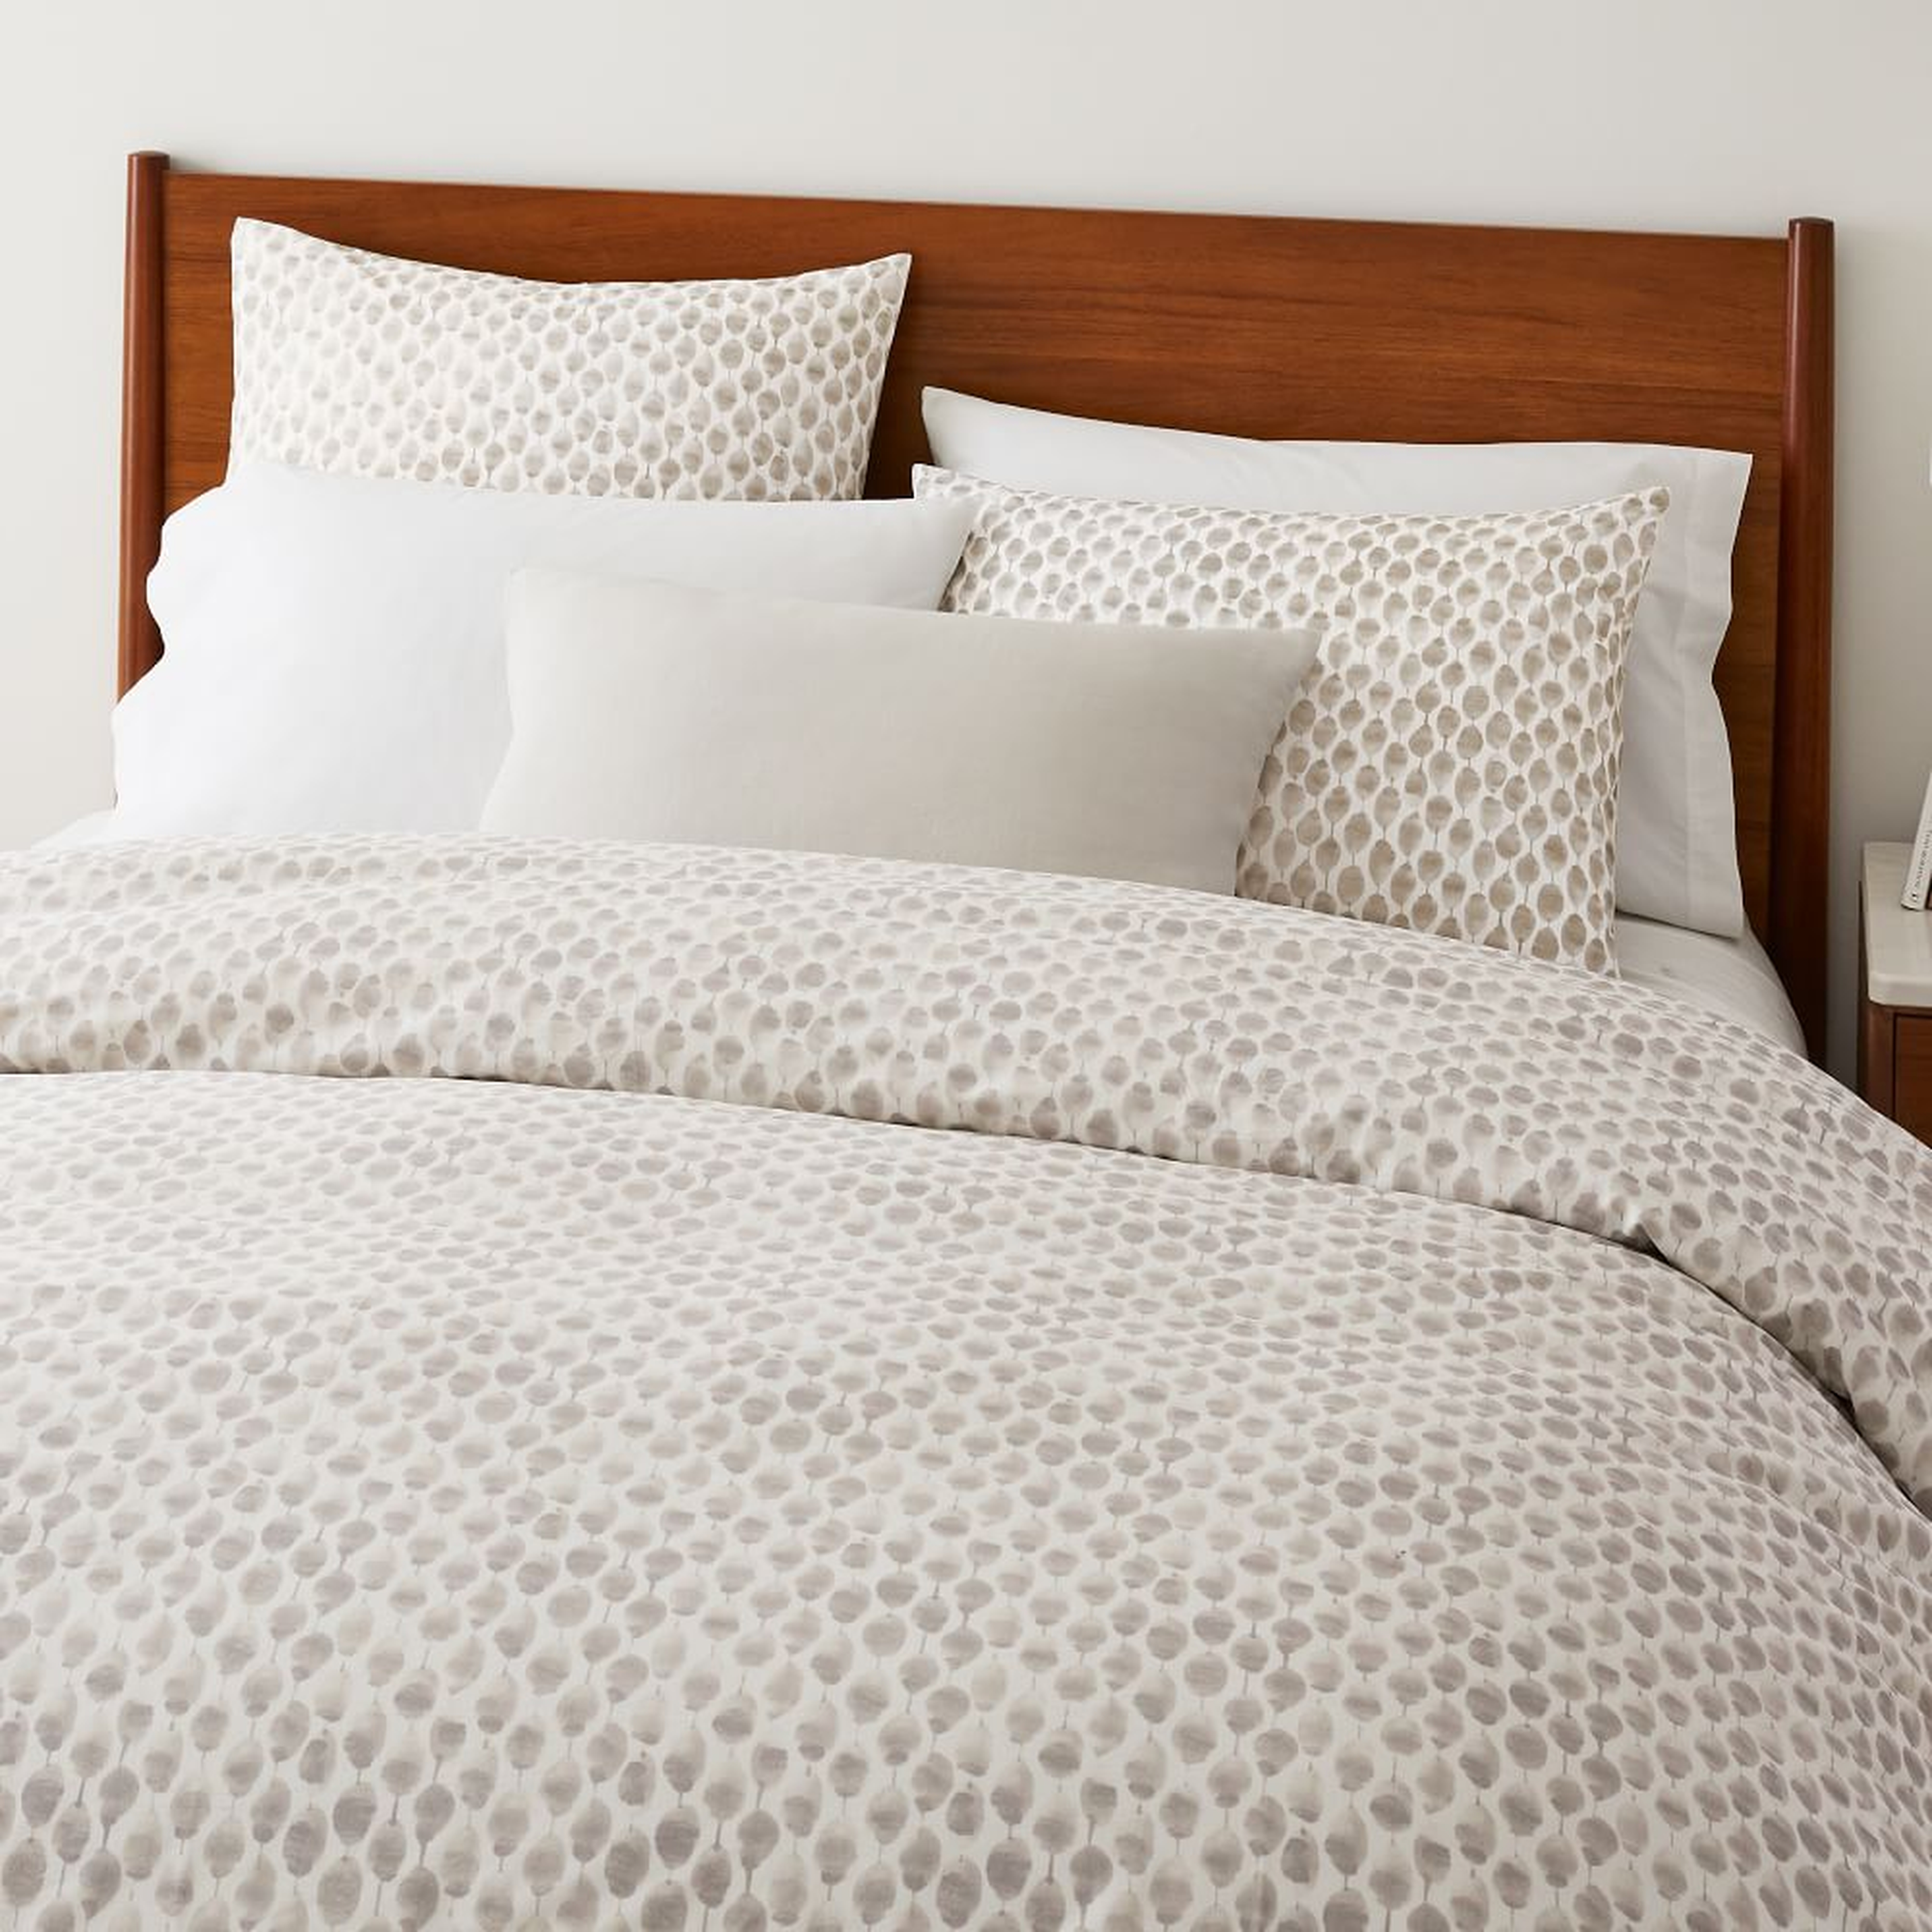 Organic Percale Stamped Dot Duvet, King/Cal. King Set, Frost Gray - West Elm